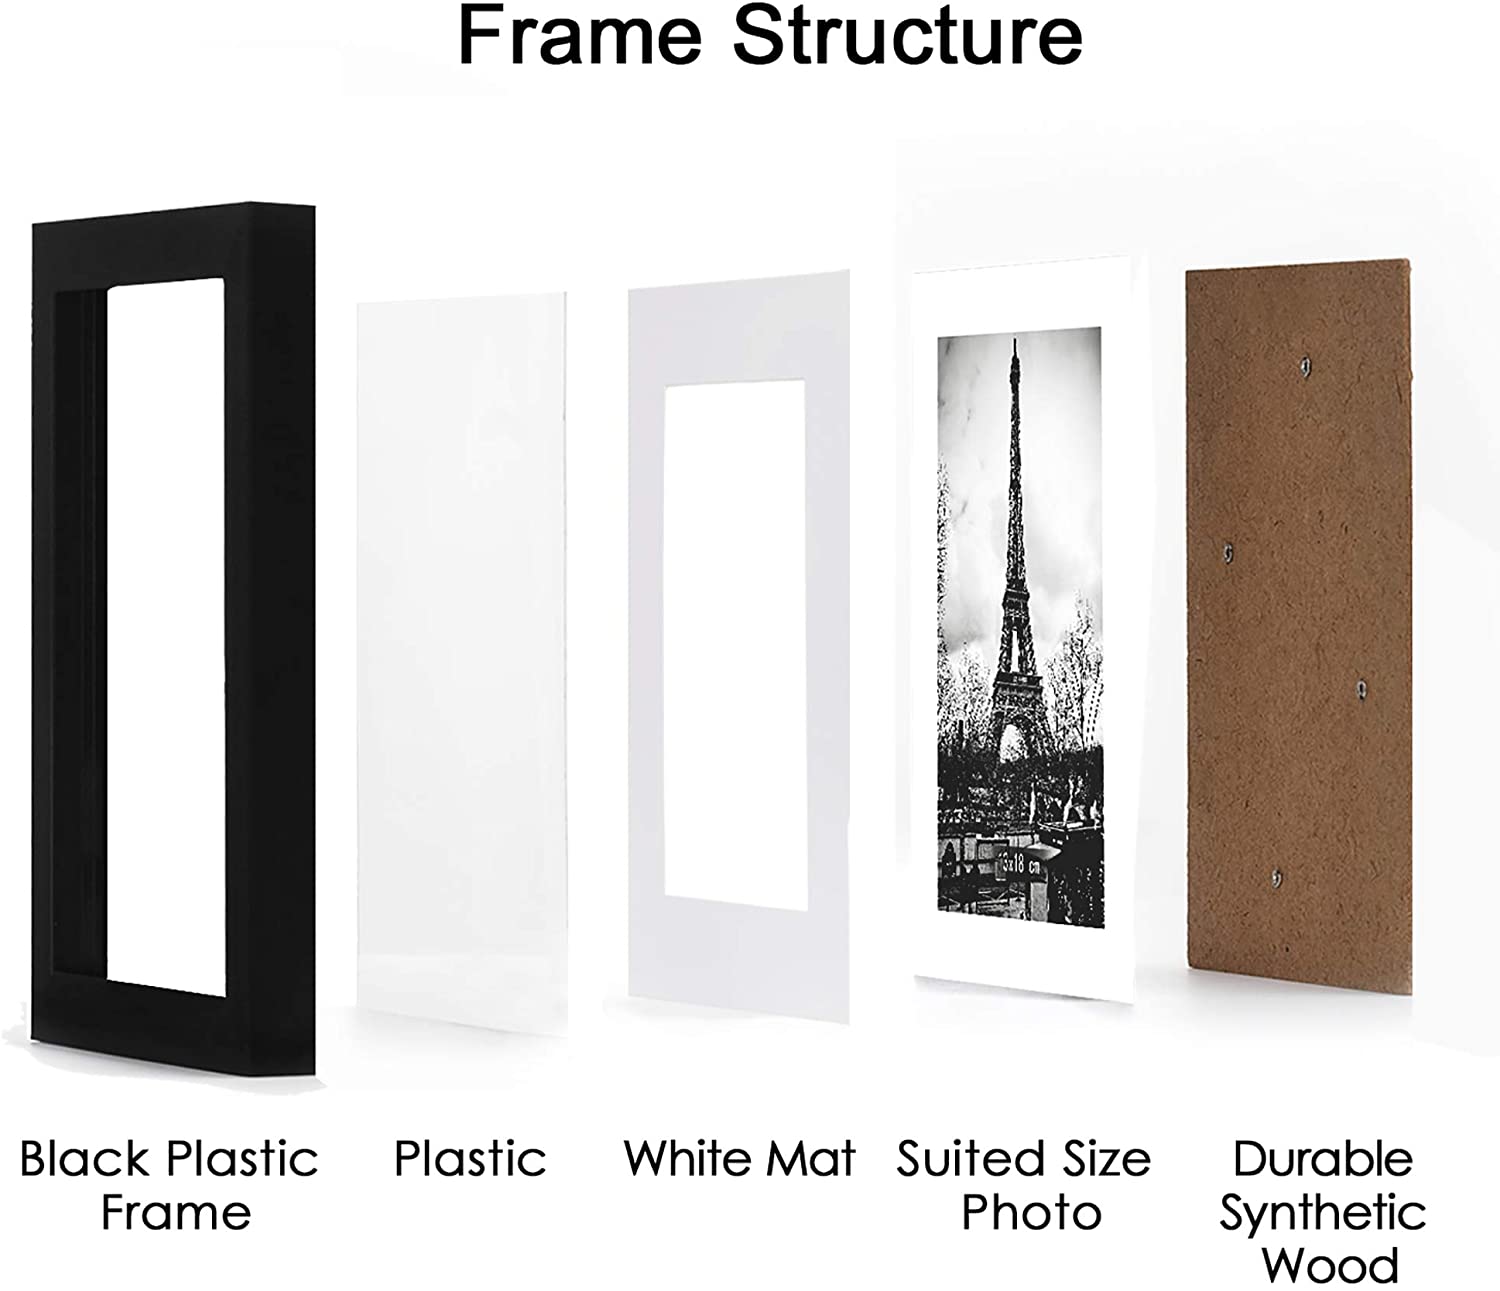 upsimples 16x20 Picture Frame Set of 5, Display Pictures 11x14 with Ma –  Upsimples Direct